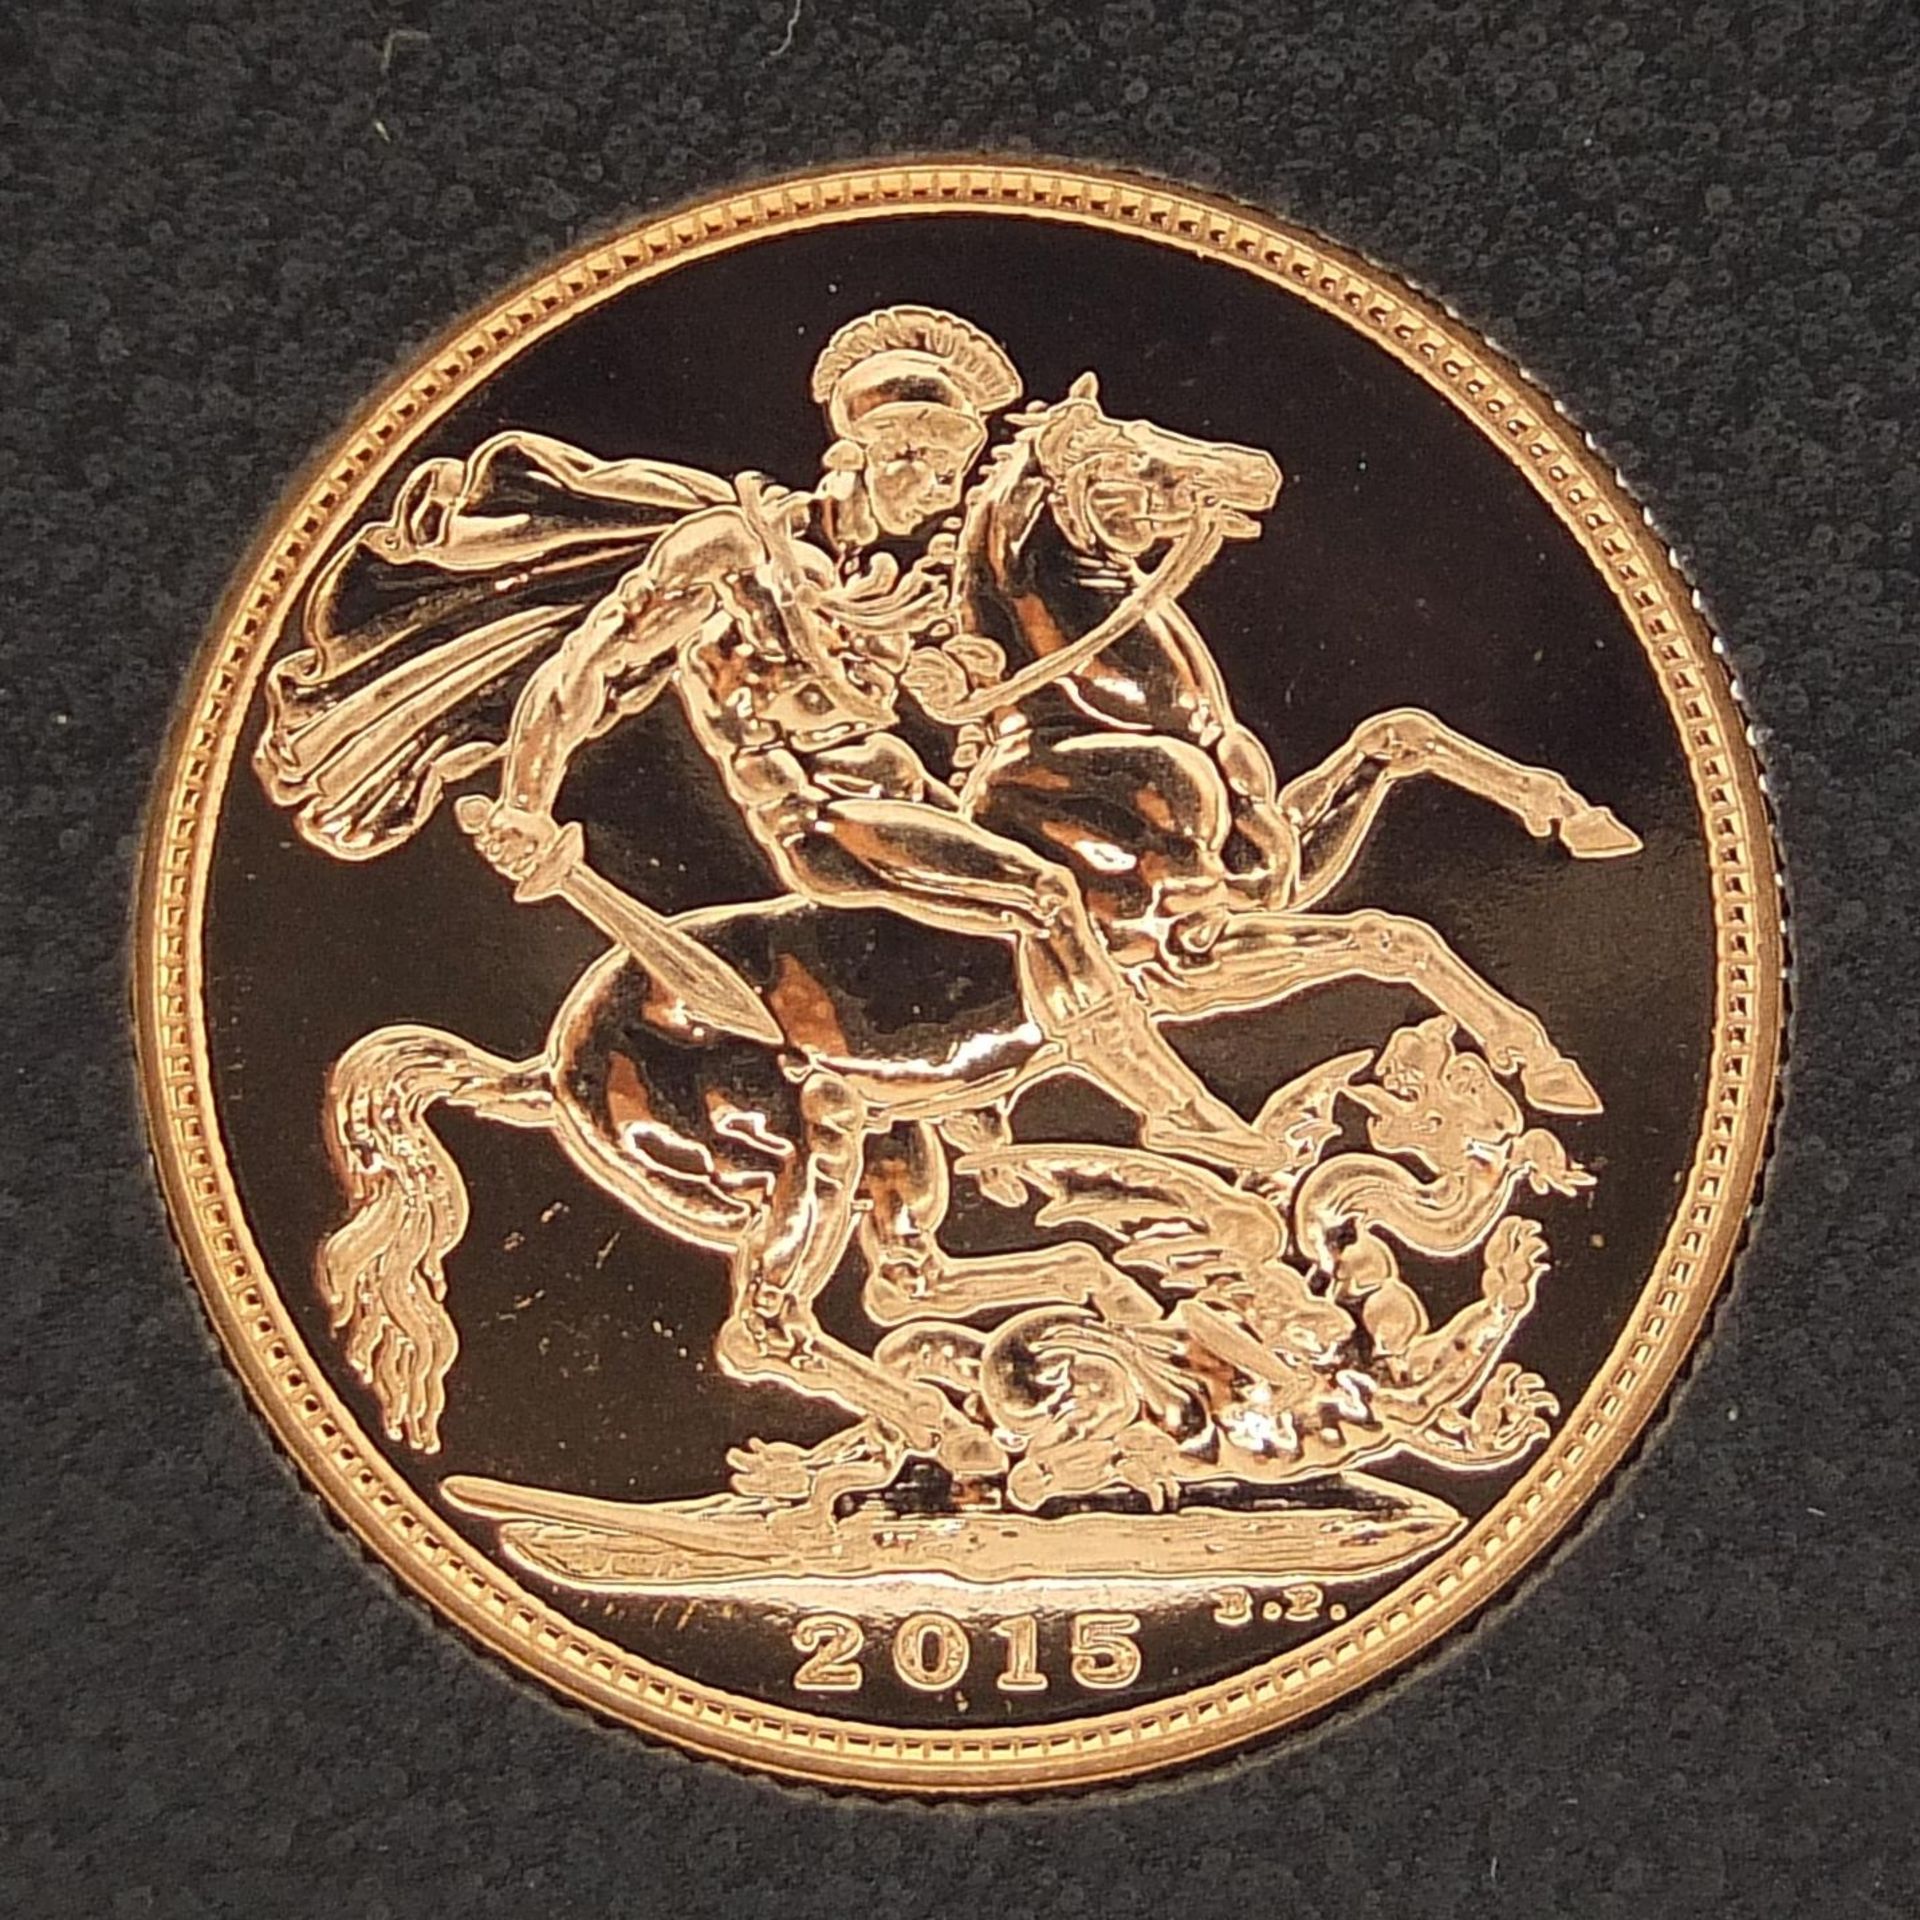 Elizabeth II 2015 gold sovereign housed in portfolio management coin capsule - this lot is sold